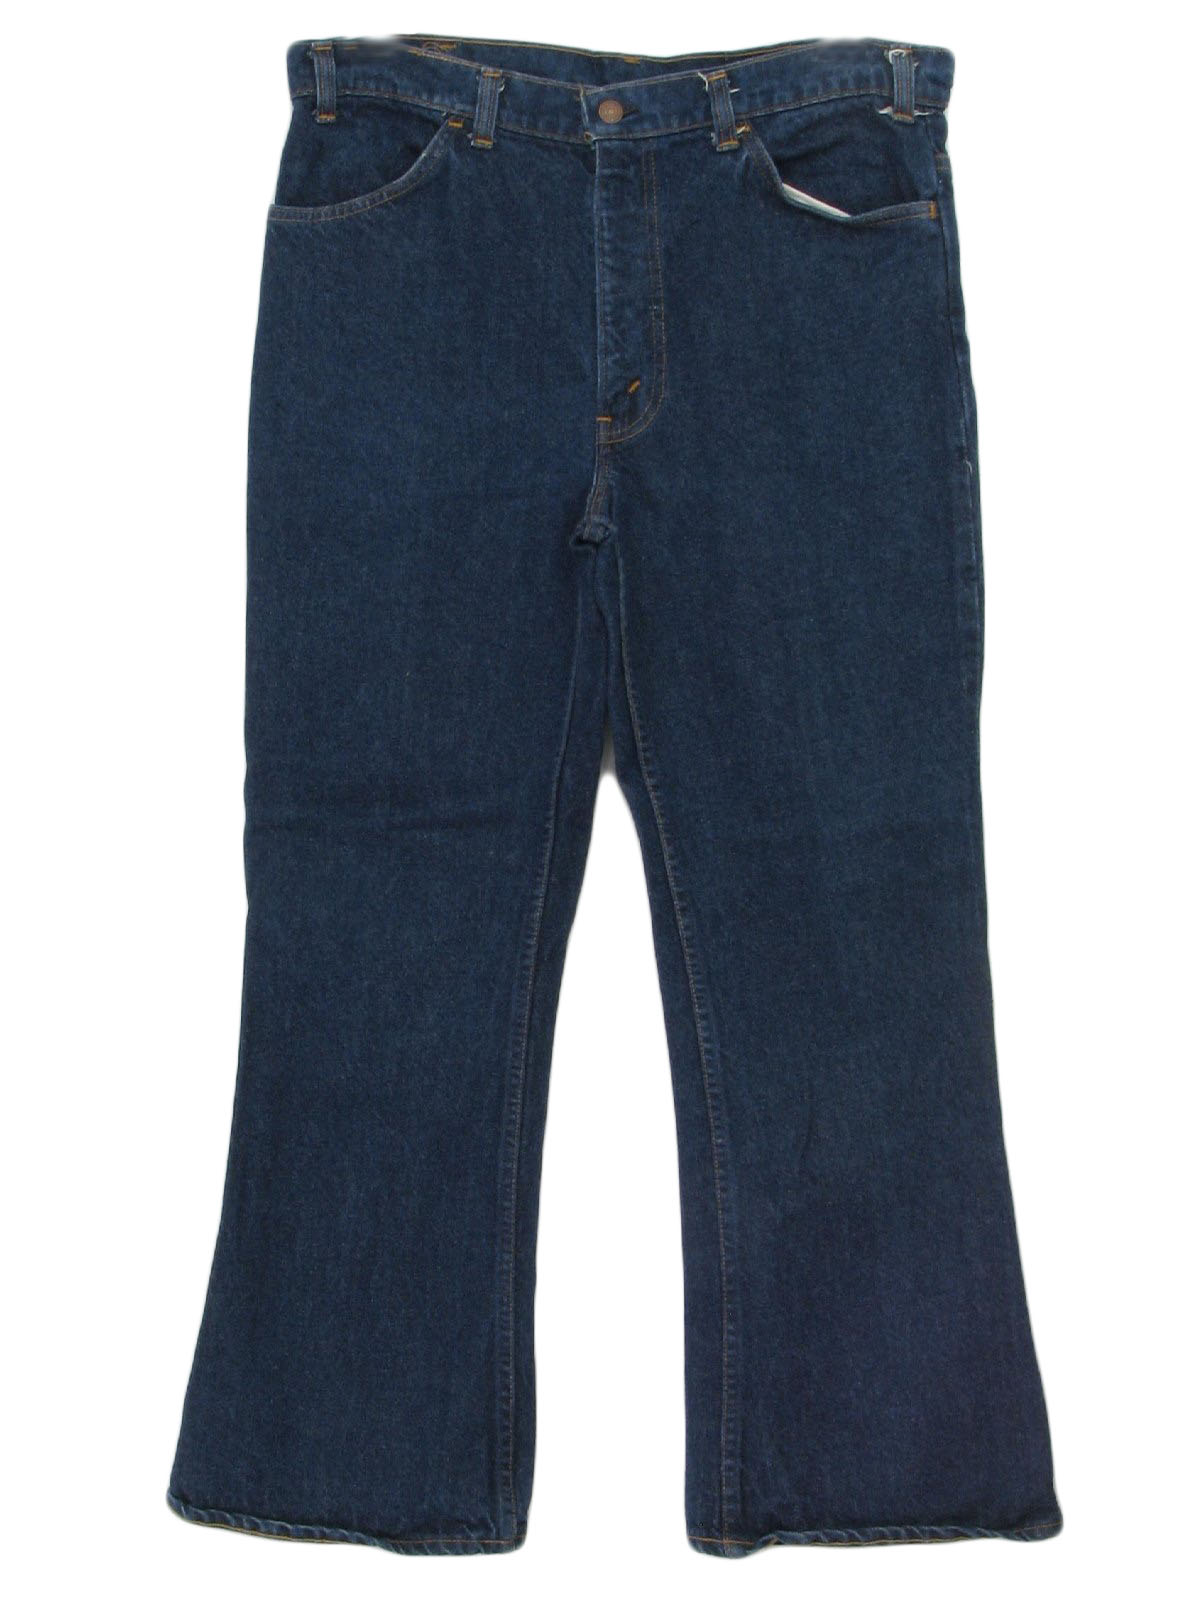 60s Flared Pants / Flares (Levis): Late 60s or early 70s -Levis- Mens ...